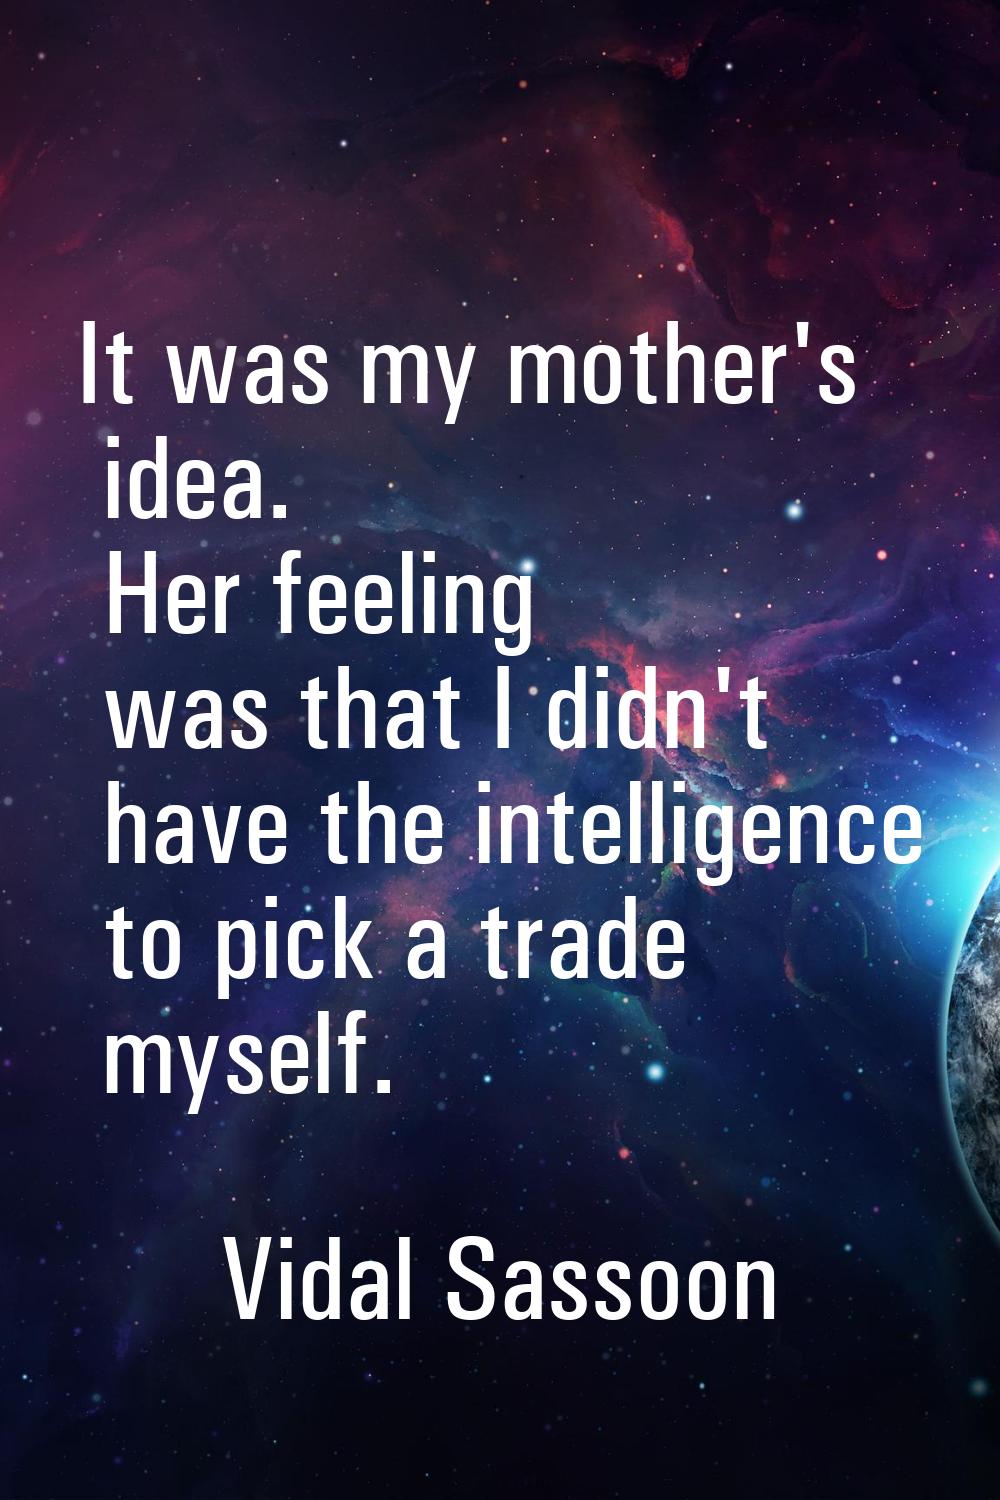 It was my mother's idea. Her feeling was that I didn't have the intelligence to pick a trade myself